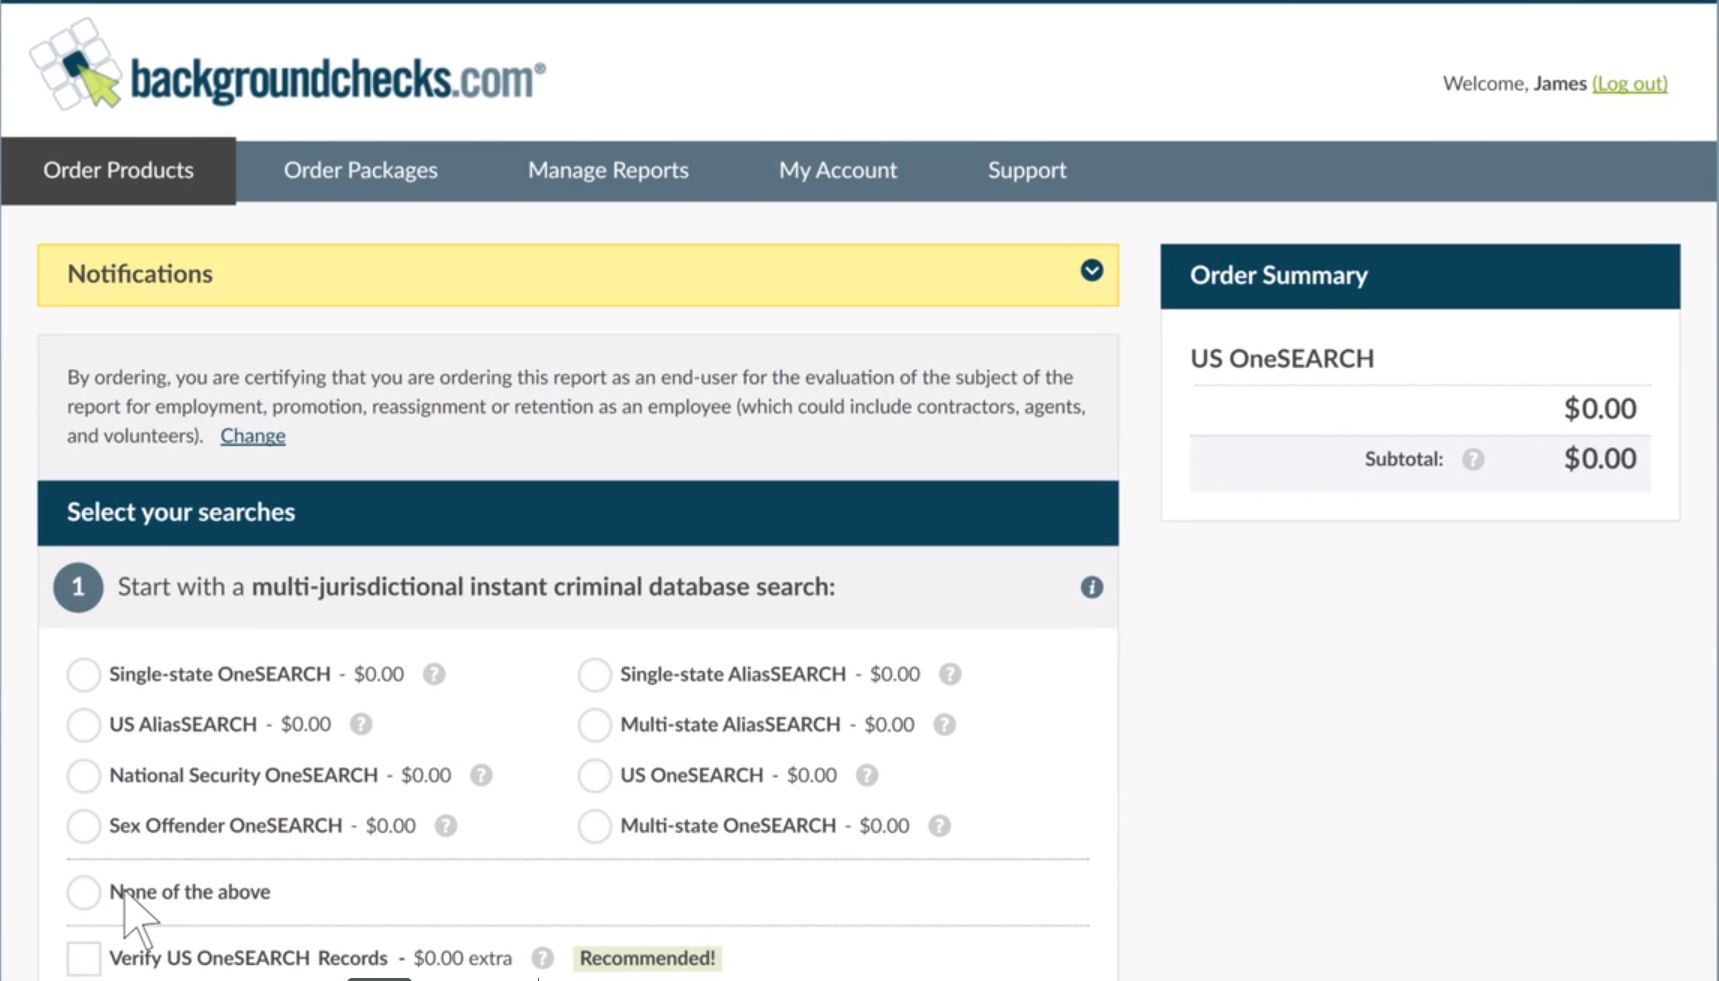 US OneSEARCH search selection